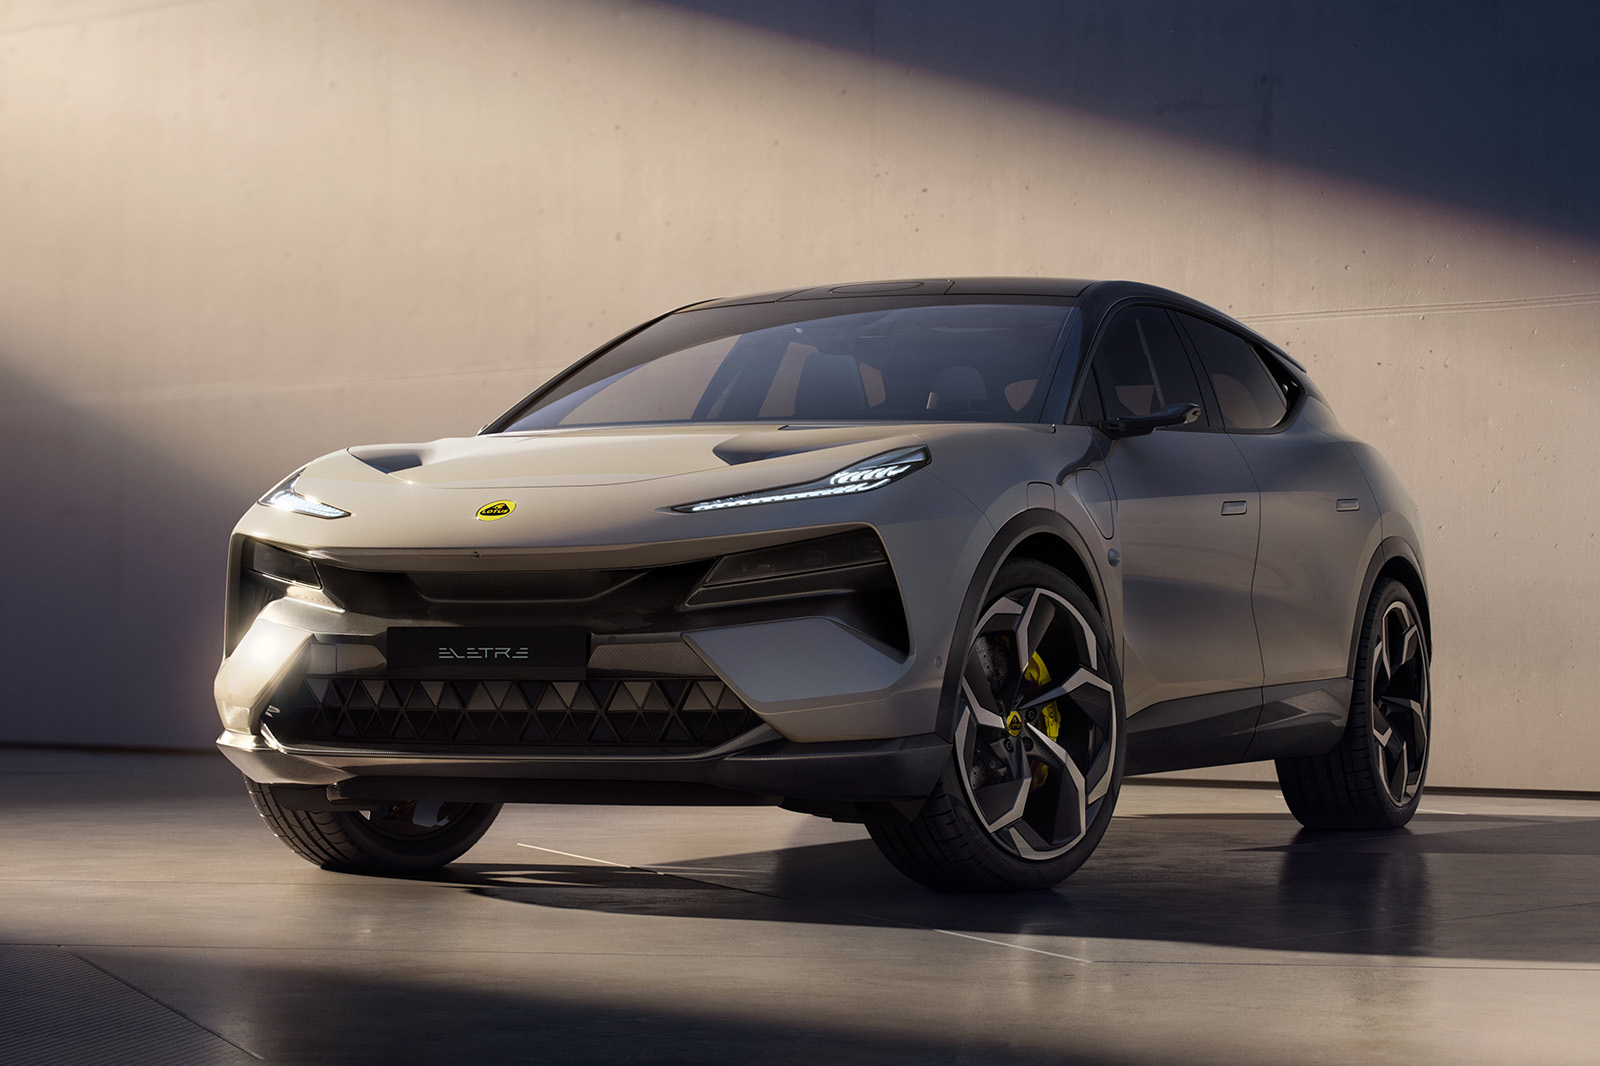 001-Lotus-first-electric-SUV-Eletre